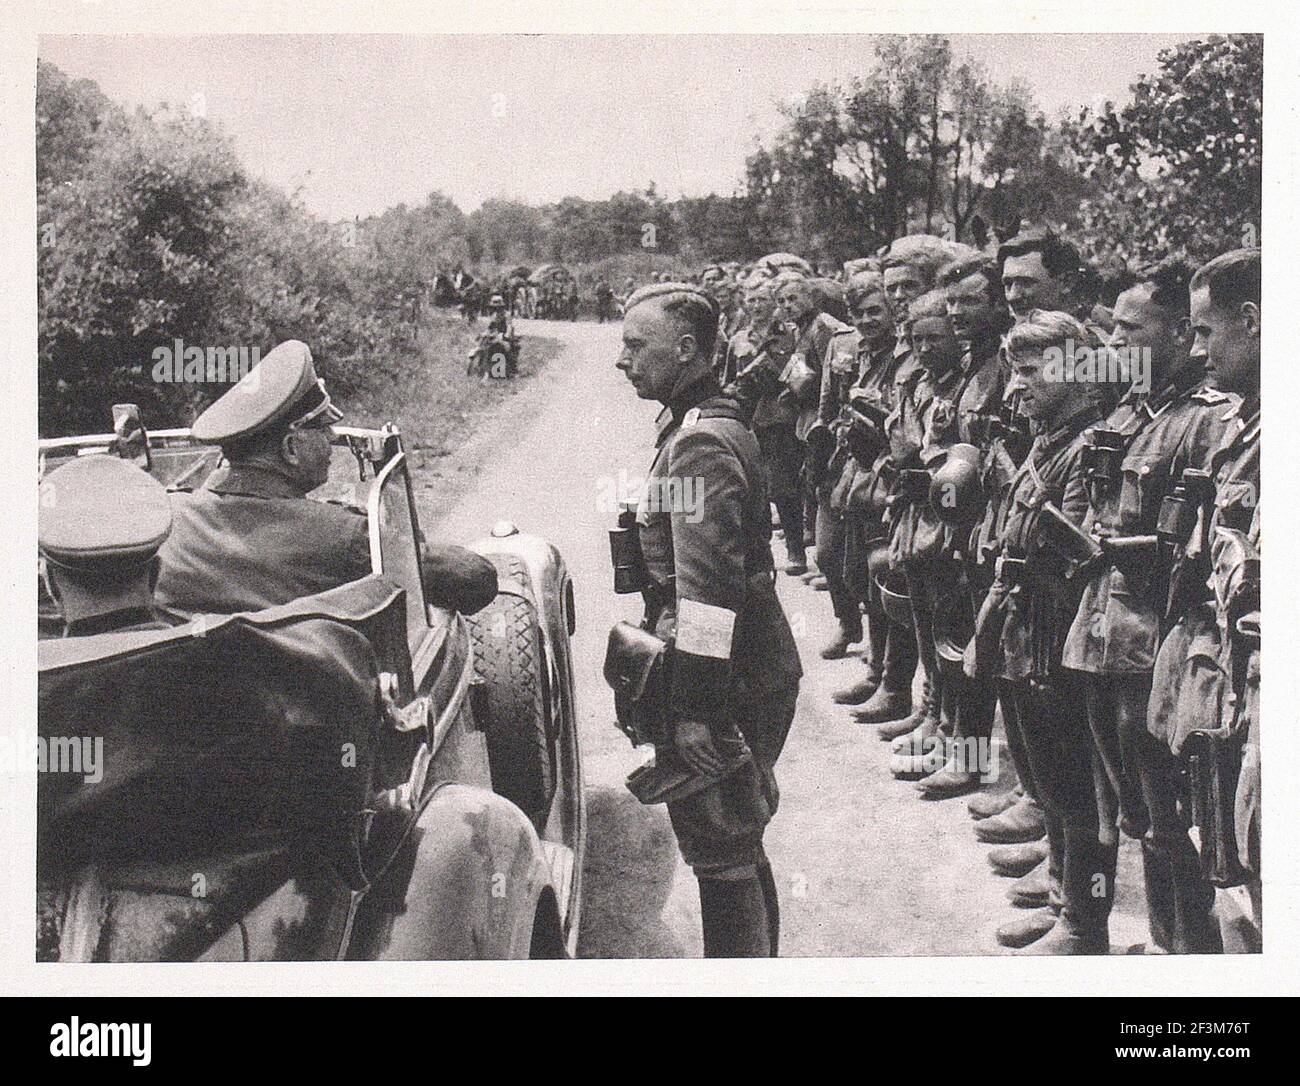 World War II period from German propaganda news. German Commander (Gerd von Rundstedt?) greets his soldiers during the victory march in France. 1940 Stock Photo